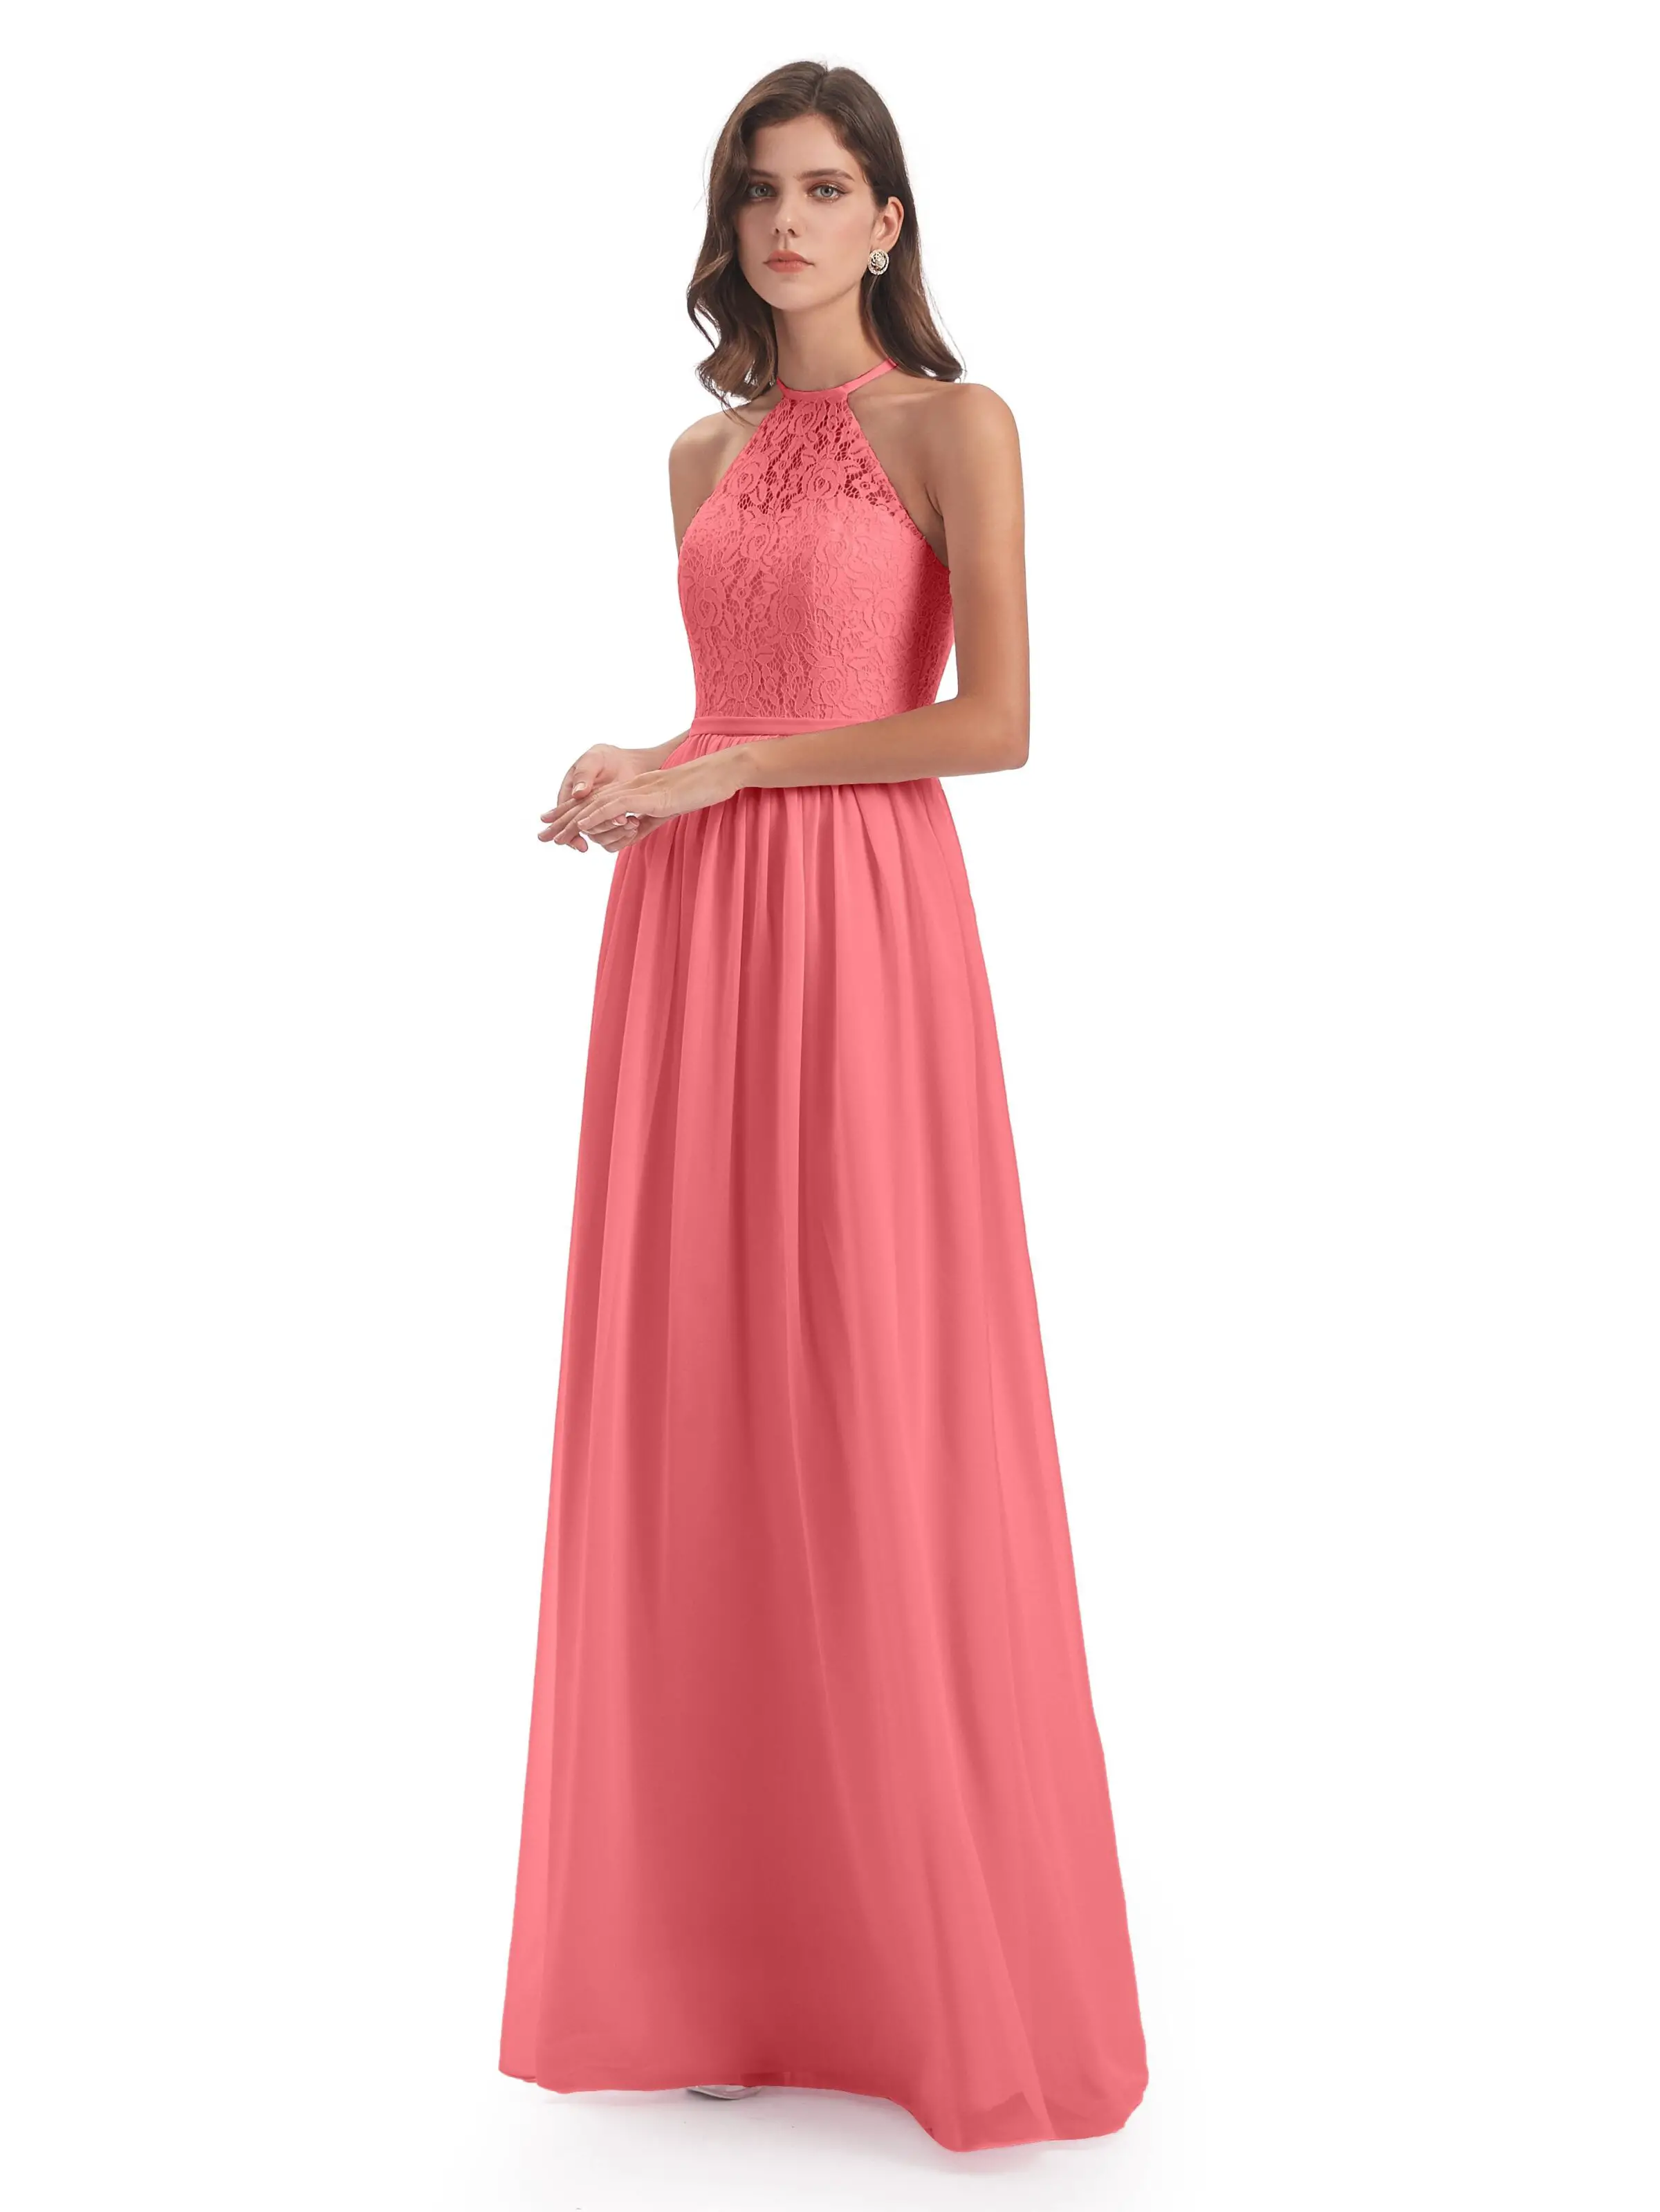 Colors for bridesmaid dresses in 2022 - Coral with Halterneck